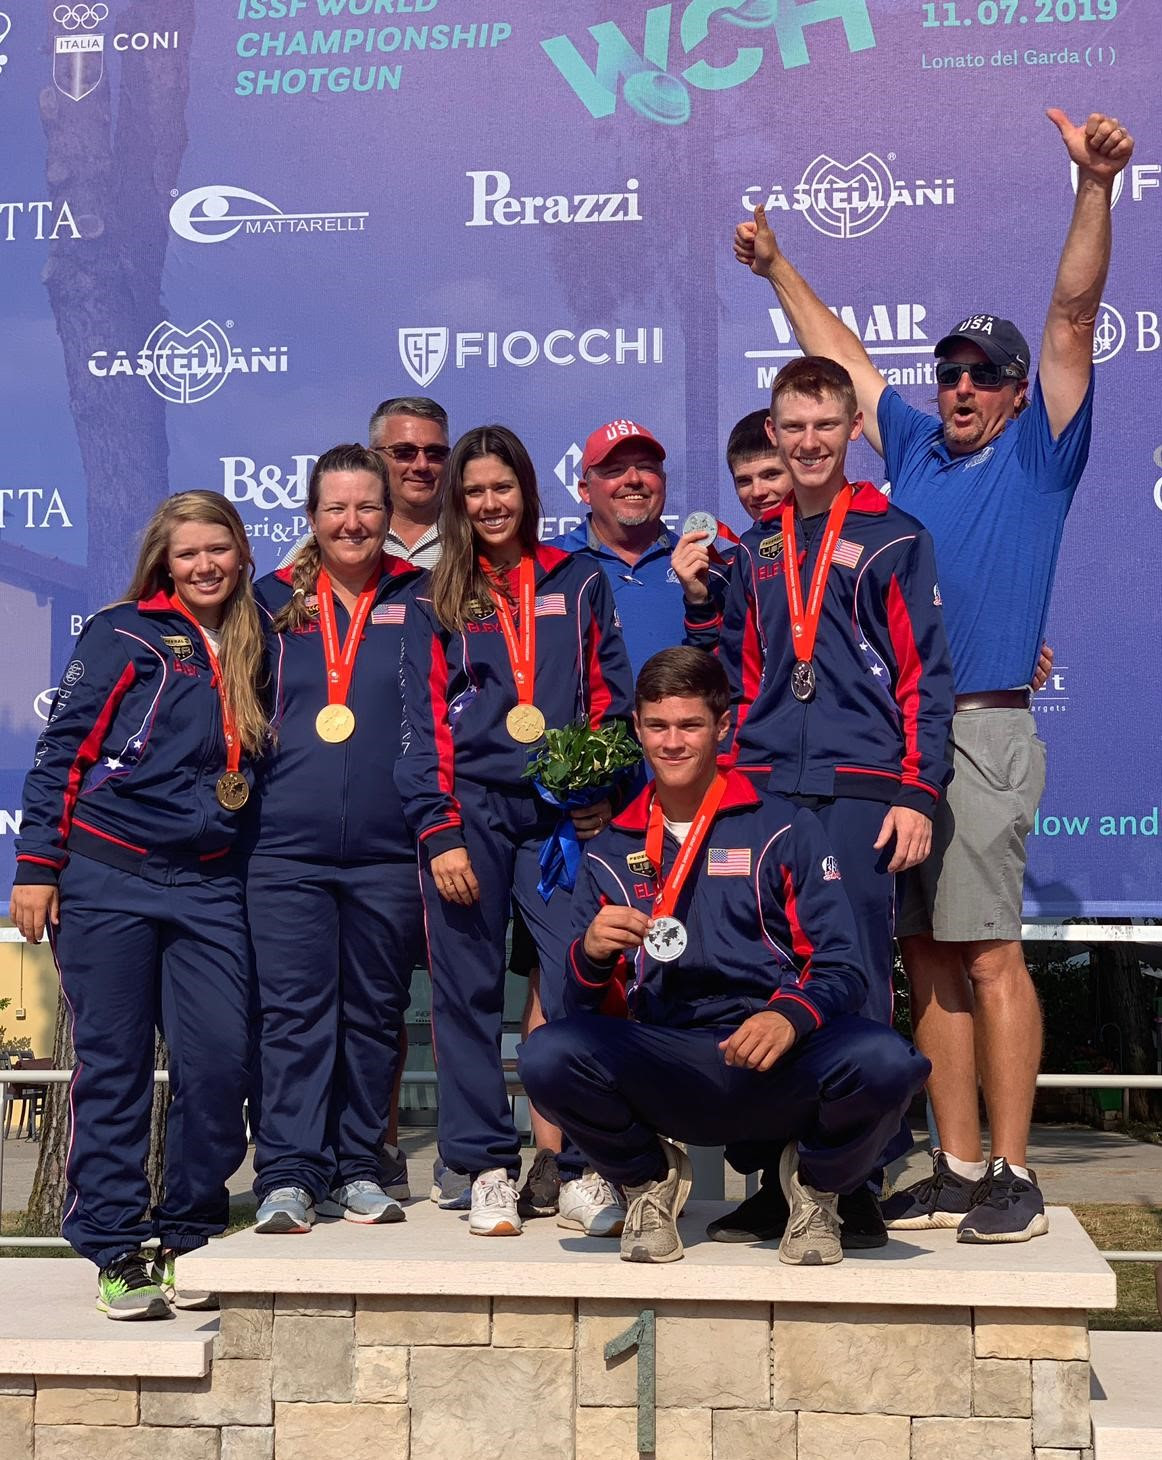 Two Team Medals Concludes Shotgun World Championships